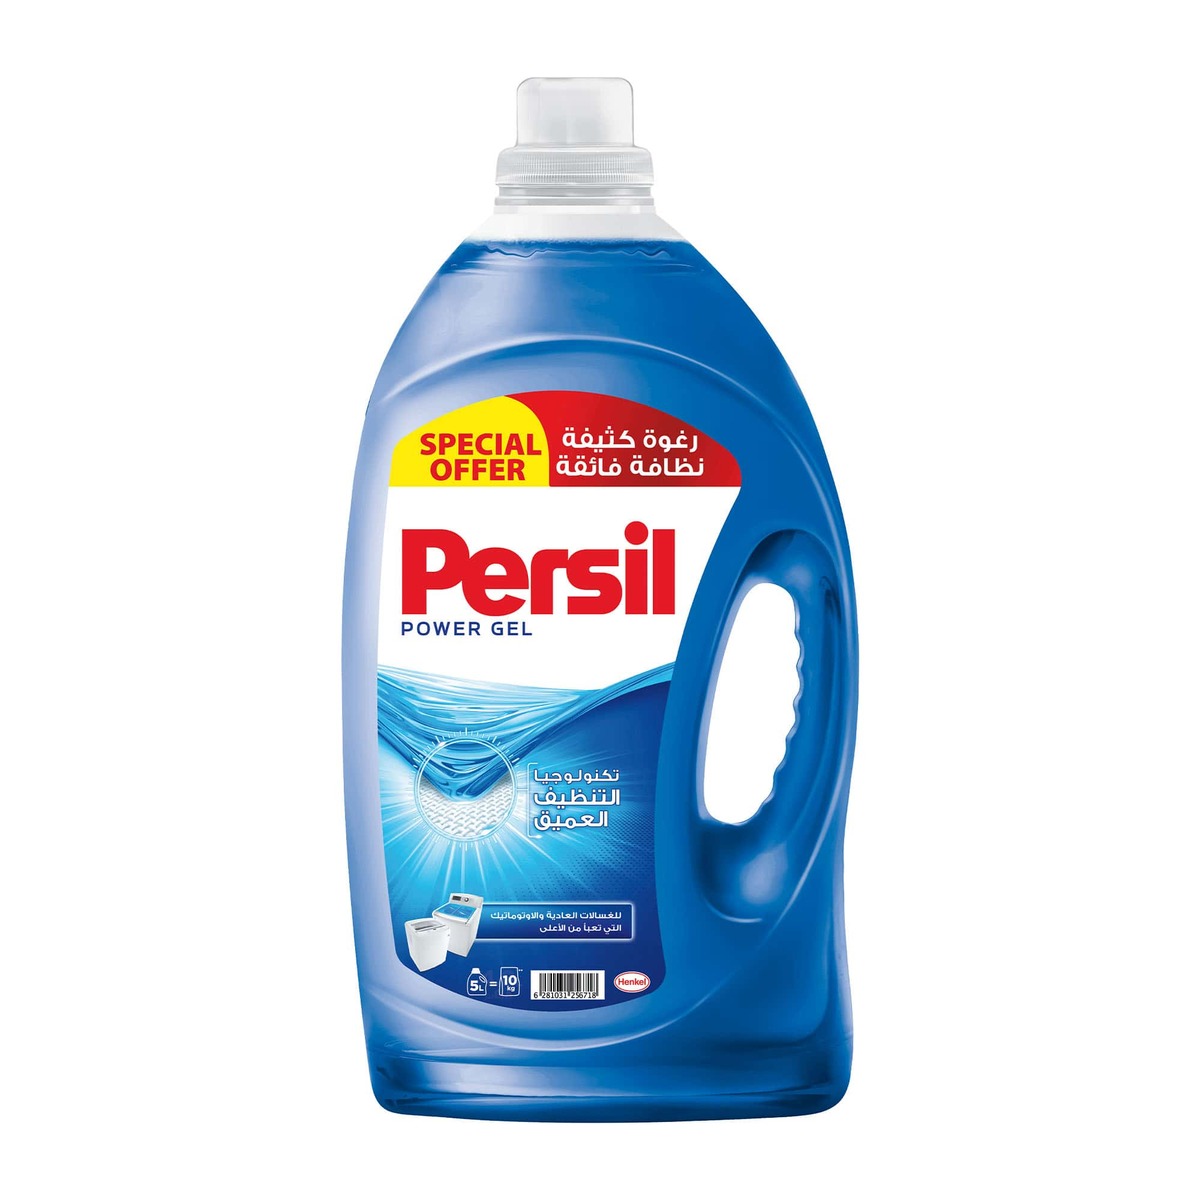 Persil Power Gel Liquid Laundry Detergent For Top Loading Washing Machines 5 Litres